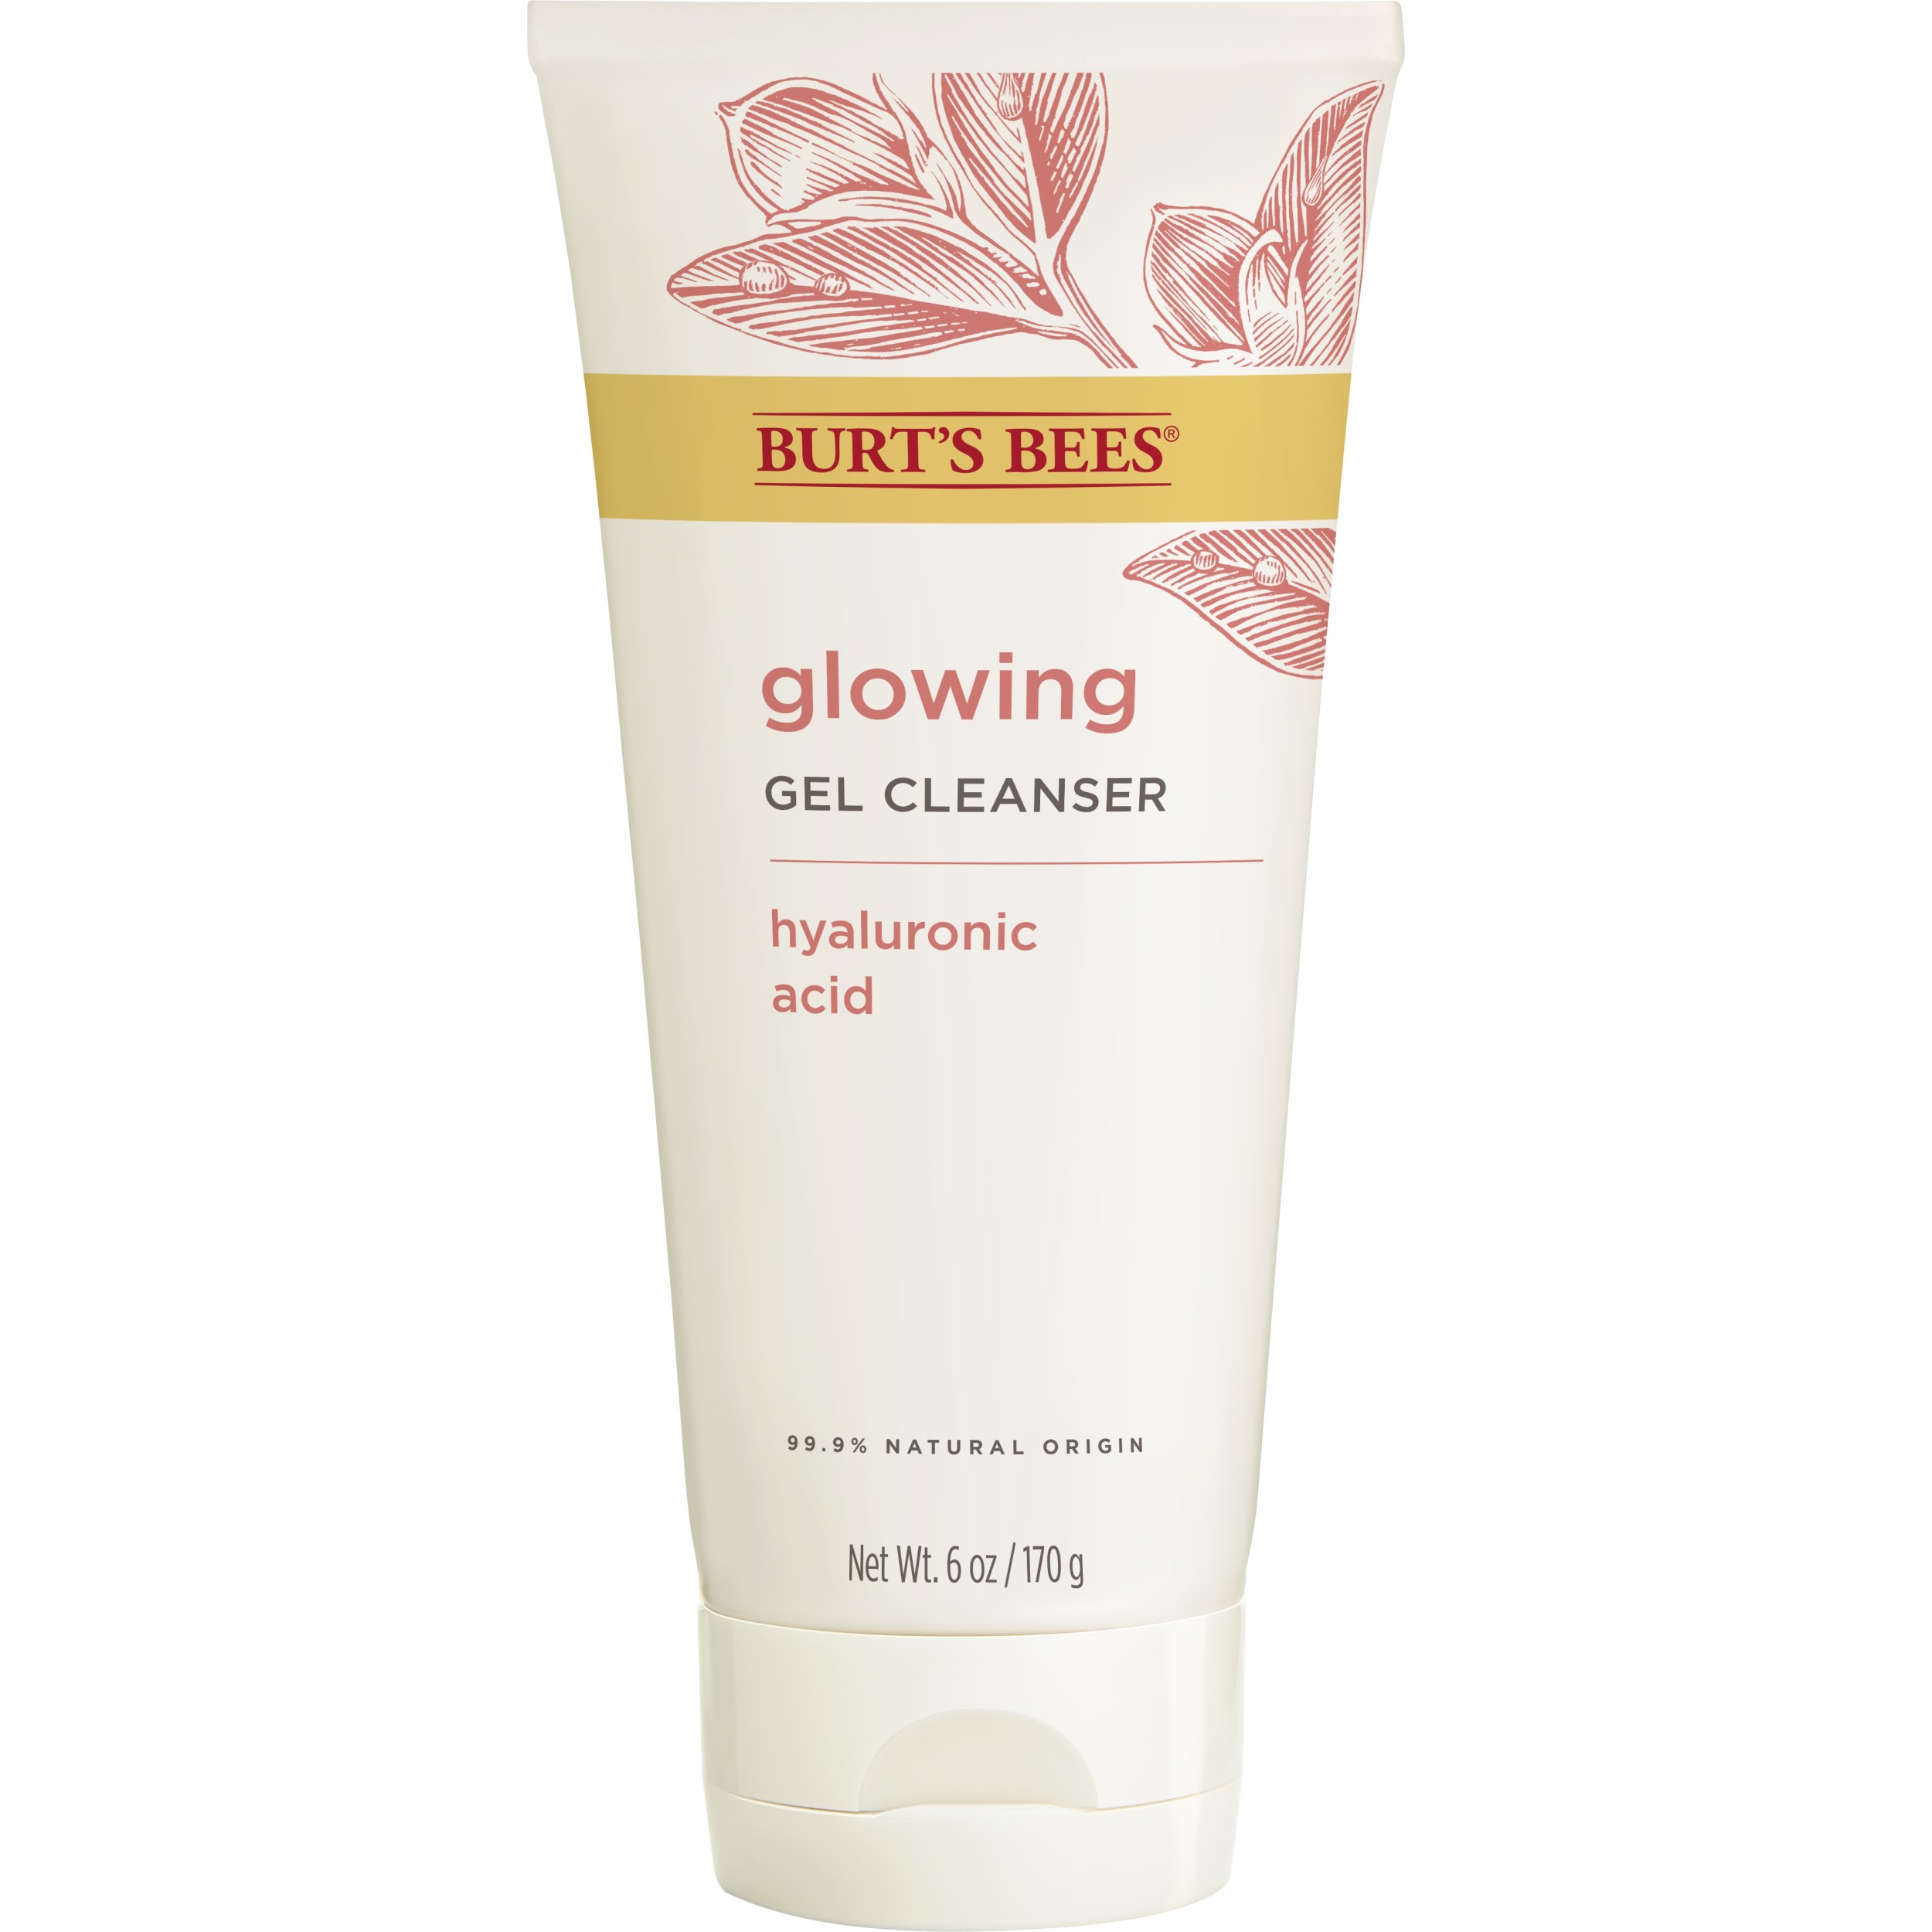 Burt's Bees Truly Glowing Refreshing Gel Cleanser with Naturally Derived Hyaluronic Acid, 6 fl oz - image 1 of 16